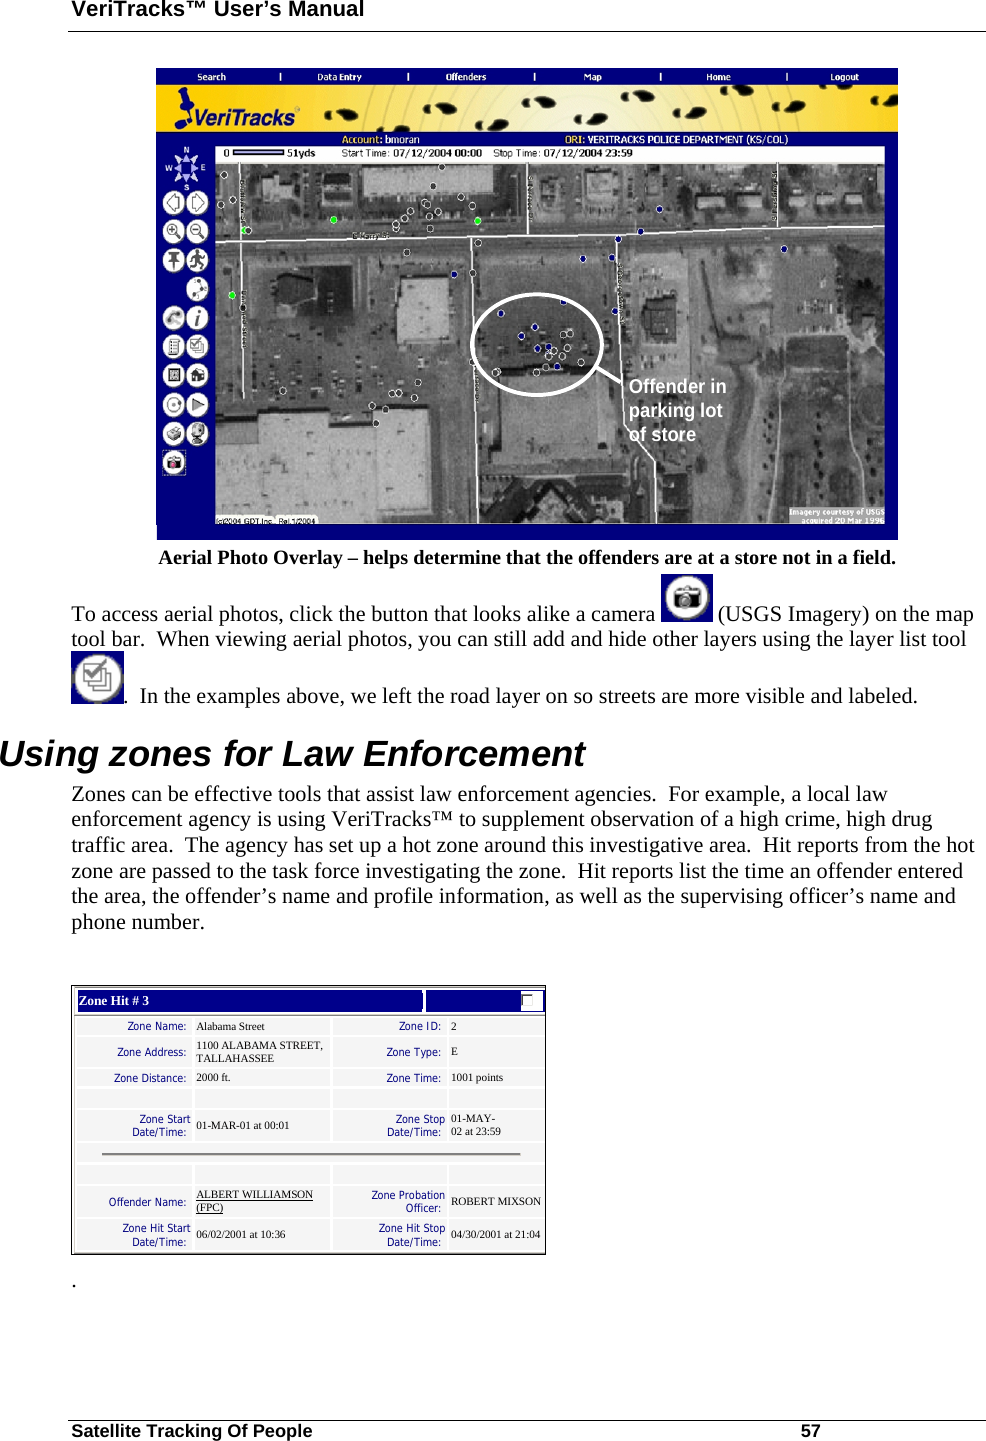 VeriTracks™ User’s Manual Satellite Tracking Of People       57 Offender in parking lot of store Aerial Photo Overlay – helps determine that the offenders are at a store not in a field. To access aerial photos, click the button that looks alike a camera   (USGS Imagery) on the map tool bar.  When viewing aerial photos, you can still add and hide other layers using the layer list tool .  In the examples above, we left the road layer on so streets are more visible and labeled. Using zones for Law Enforcement Zones can be effective tools that assist law enforcement agencies.  For example, a local law enforcement agency is using VeriTracks™ to supplement observation of a high crime, high drug traffic area.  The agency has set up a hot zone around this investigative area.  Hit reports from the hot zone are passed to the task force investigating the zone.  Hit reports list the time an offender entered the area, the offender’s name and profile information, as well as the supervising officer’s name and phone number.     Zone Hit # 3  Zone Name:   Alabama Street   Zone ID:  2  Zone Address:  1100 ALABAMA STREET, TALLAHASSEE   Zone Type:  E  Zone Distance:  2000 ft.   Zone Time:  1001 points        Zone Start Date/Time:   01-MAR-01 at 00:01   Zone Stop Date/Time:  01-MAY-02 at 23:59        Offender Name:  ALBERT WILLIAMSON (FPC)   Zone Probation Officer:  ROBERT MIXSON Zone Hit Start Date/Time:   06/02/2001 at 10:36   Zone Hit Stop Date/Time:  04/30/2001 at 21:04    . 